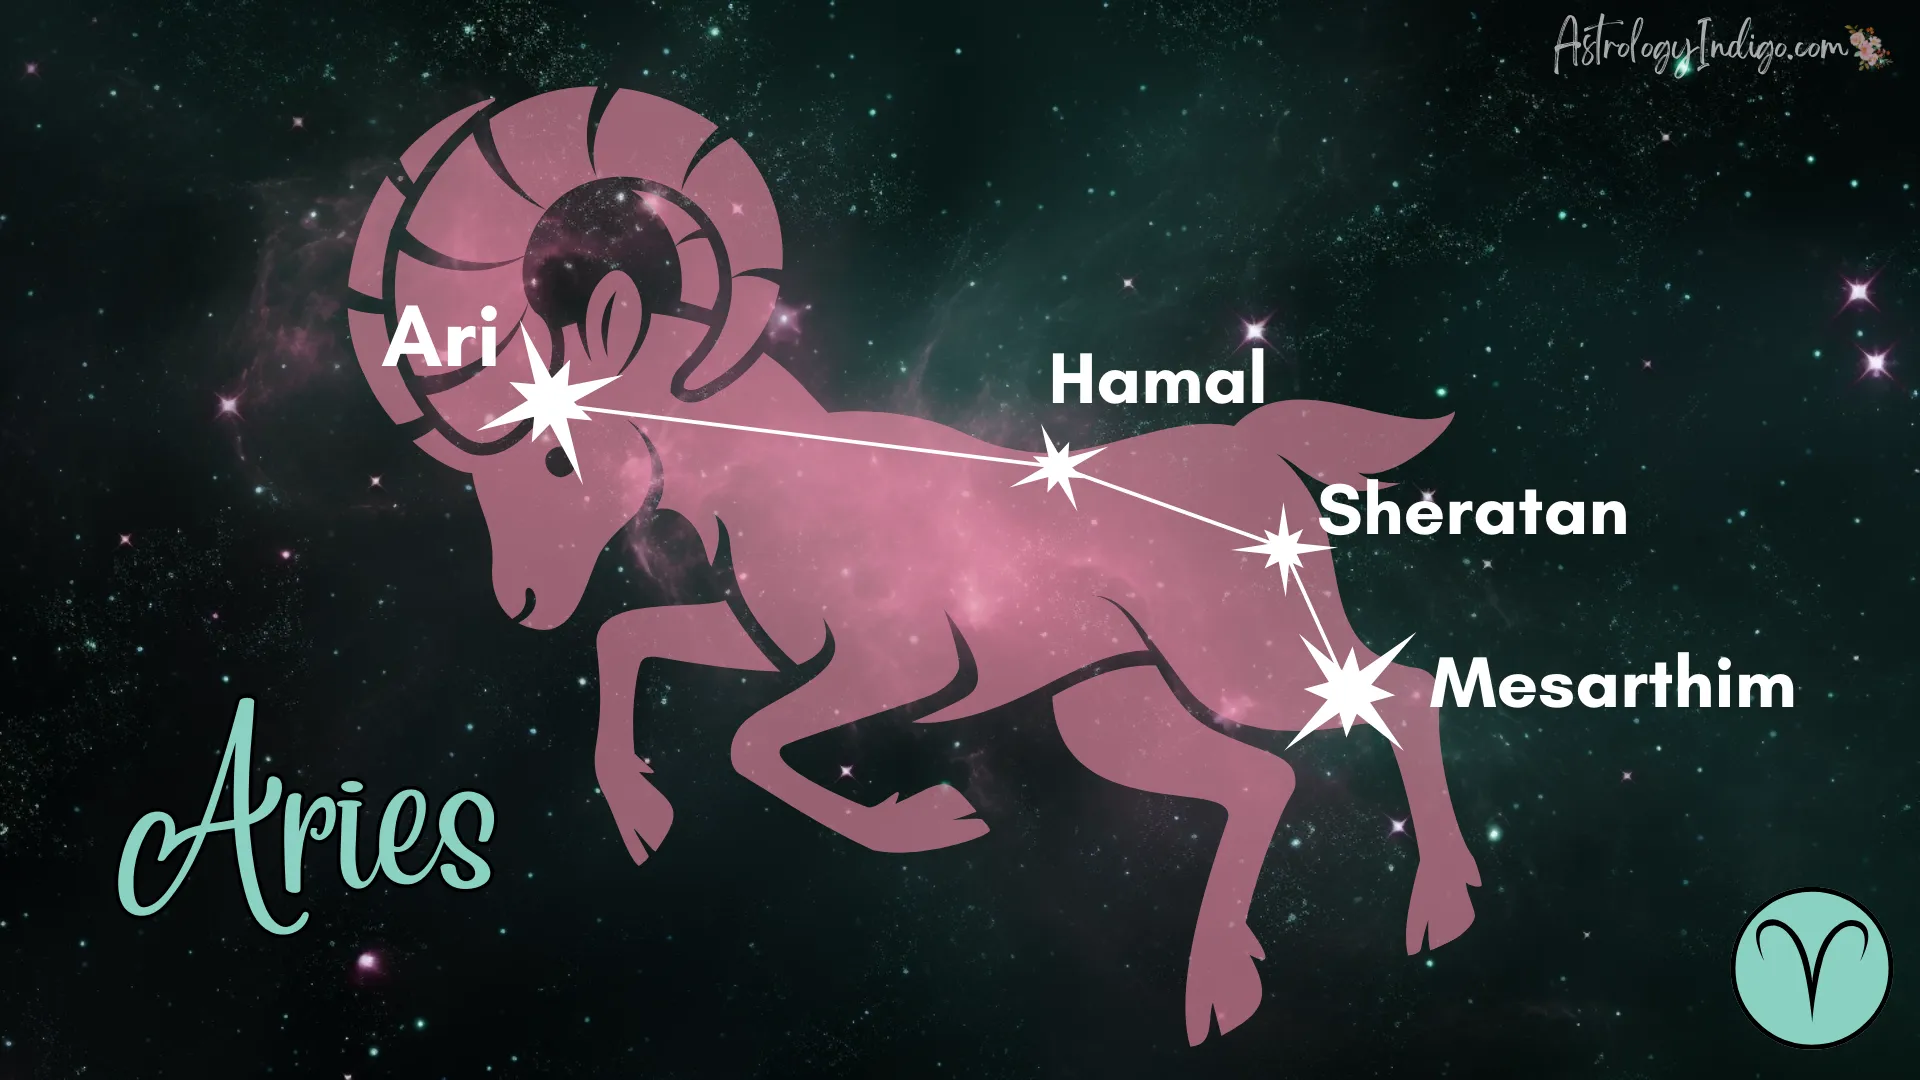 The Aries constellation with information about the stars and an image of a pink Ram behind it.